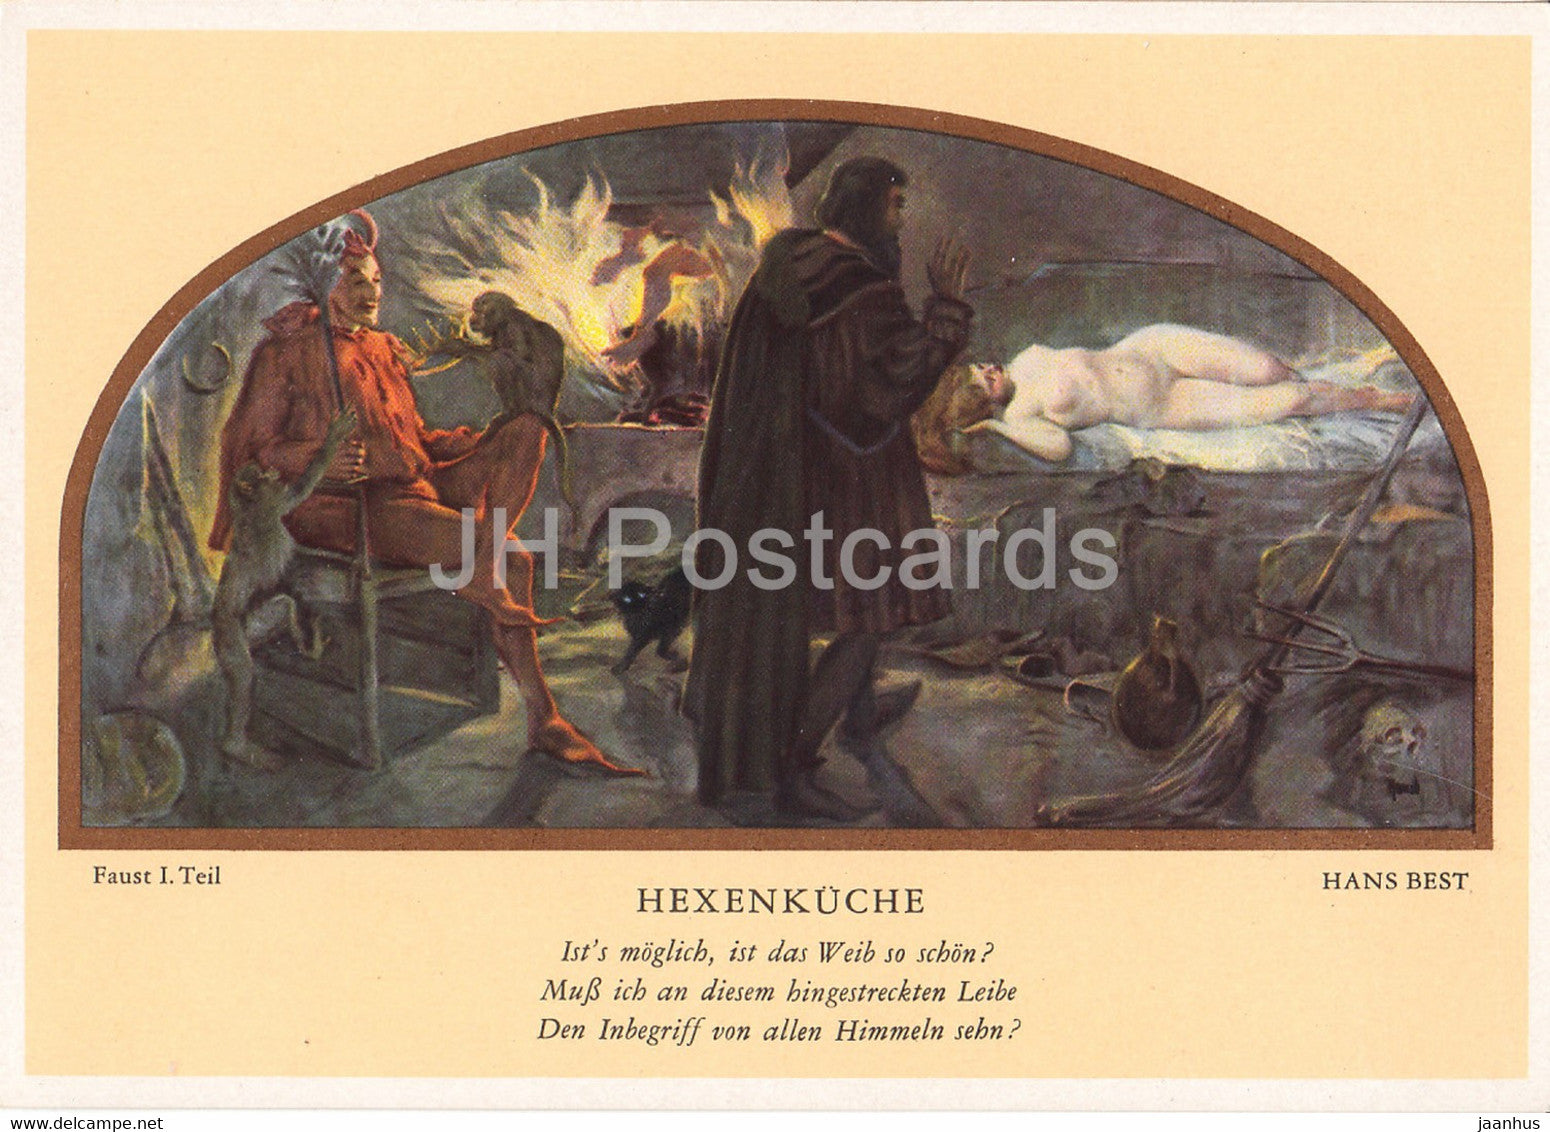 painting by Prof Molitor - Ostermorgen - Faust - Leipzig - Auerbachs Keller - German art - Germany DDR - unused - JH Postcards